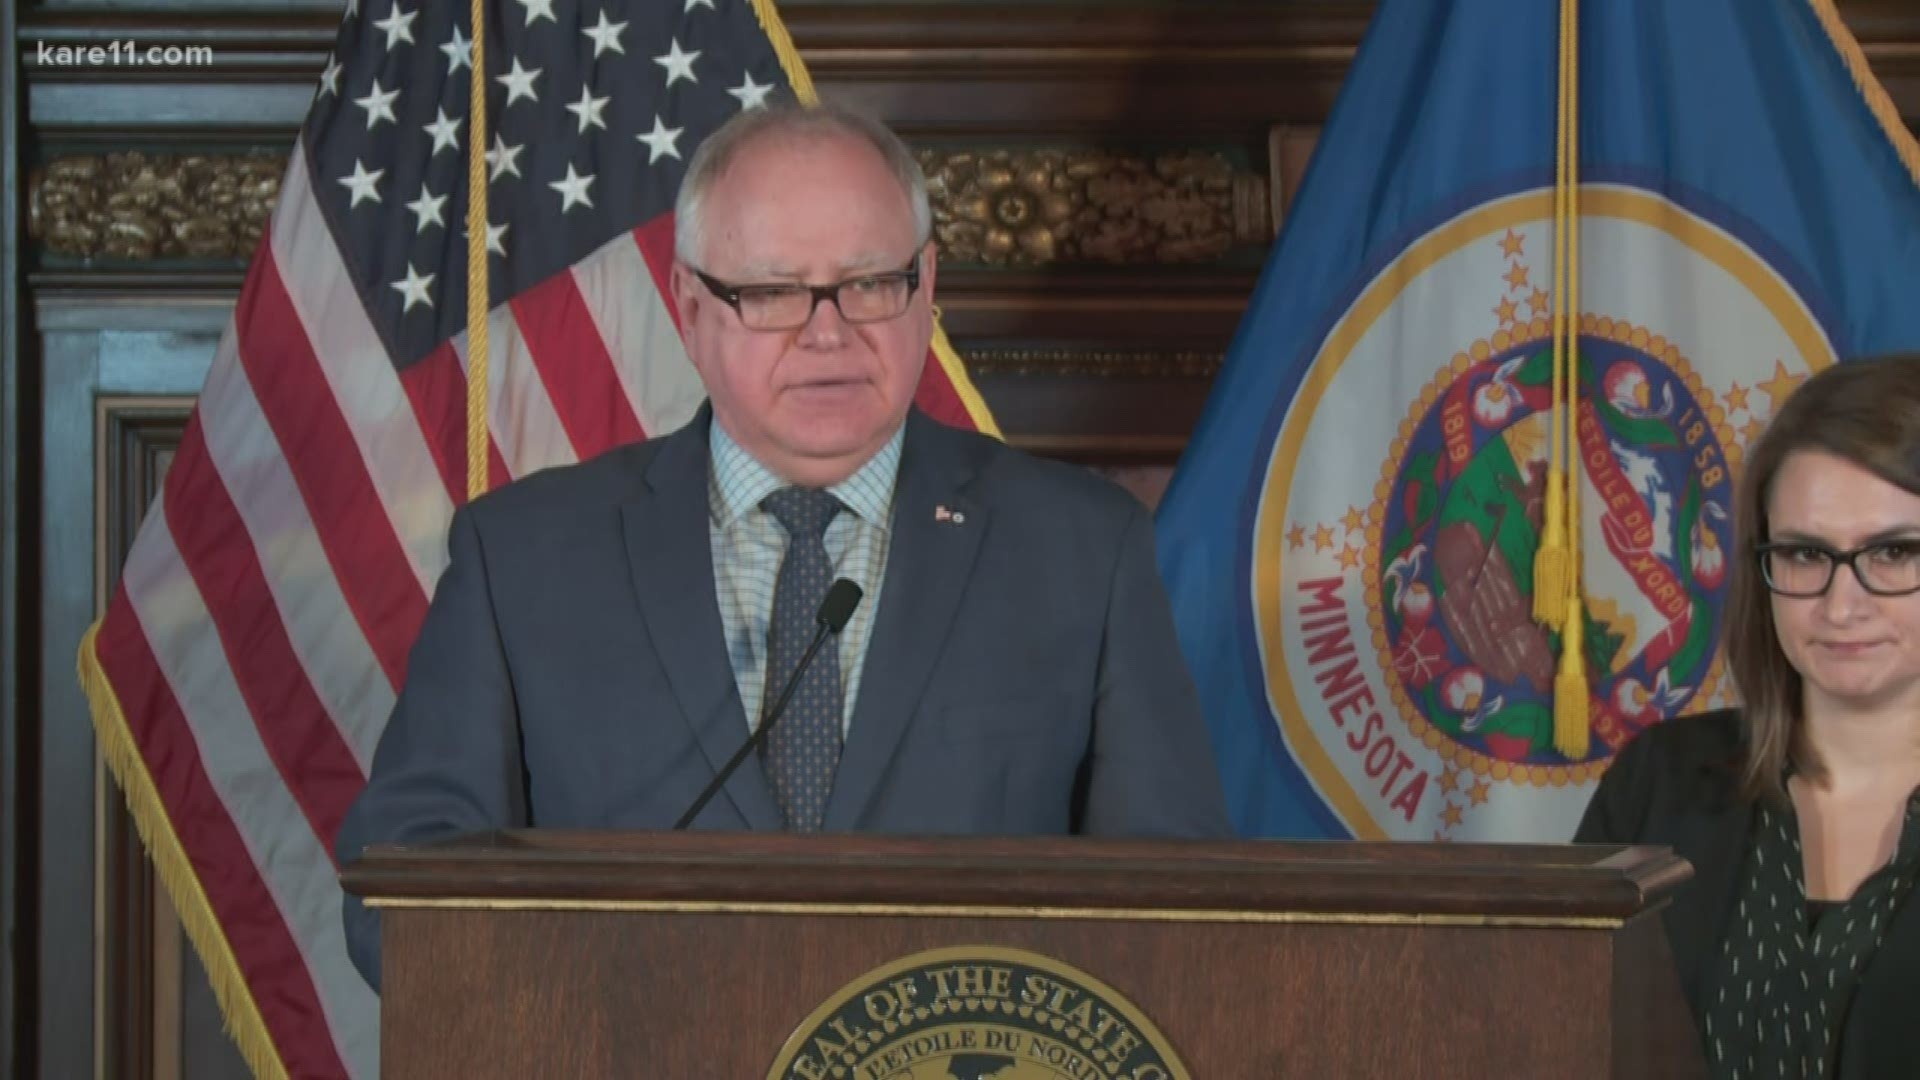 Gov. Tim Walz said Tuesday that he supports a bill moving through the state legislature that would test nearly all rape kits in Minnesota.